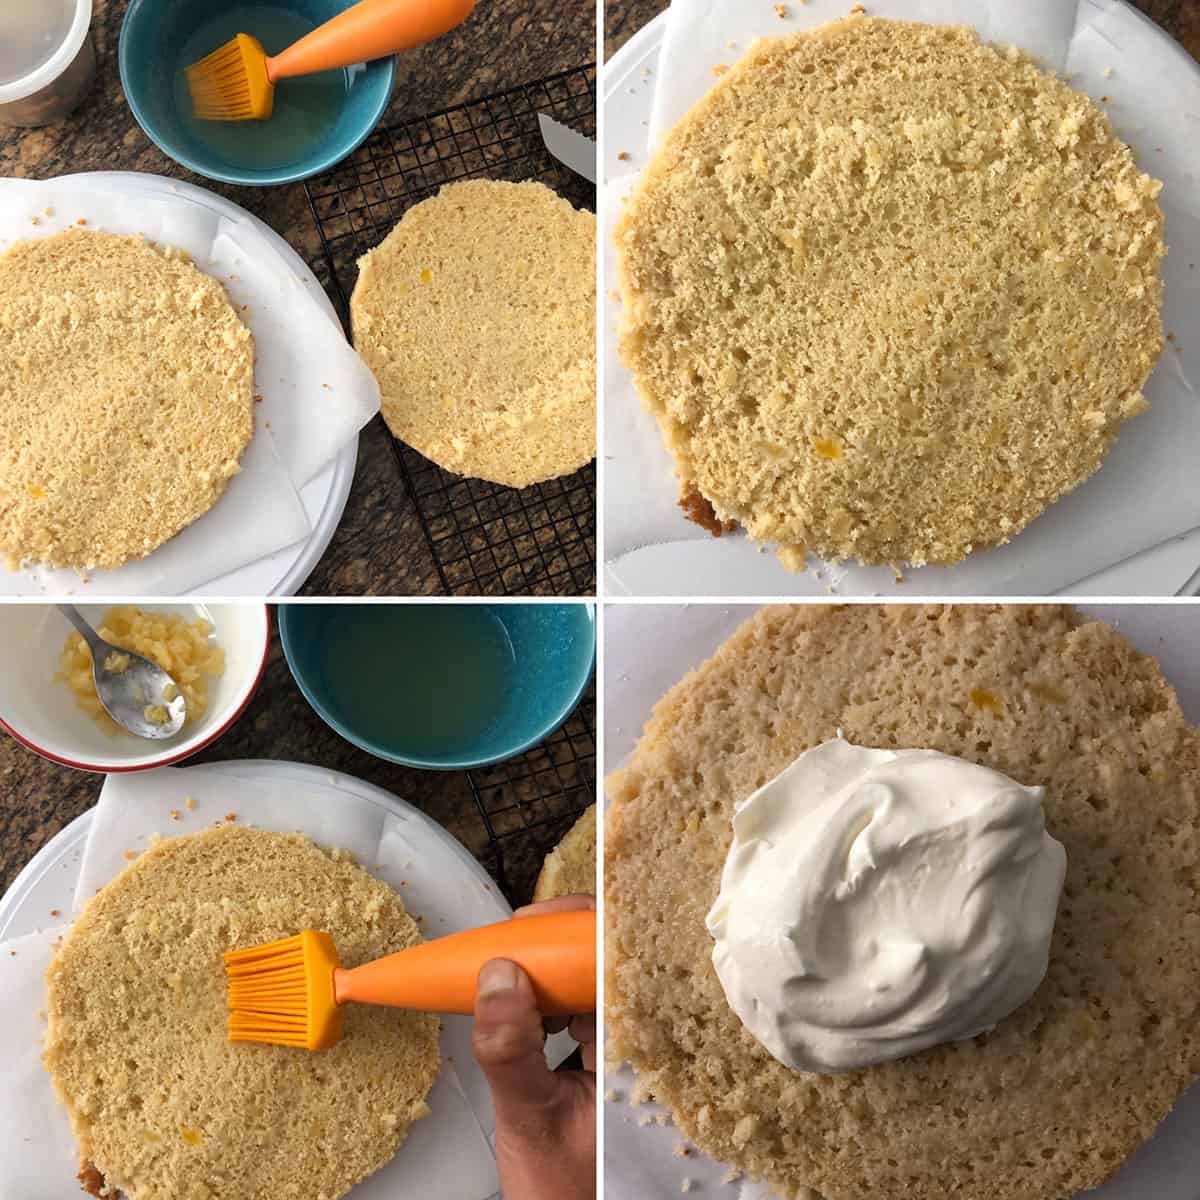 Step by step photos showing the assembling of pineapple pastry